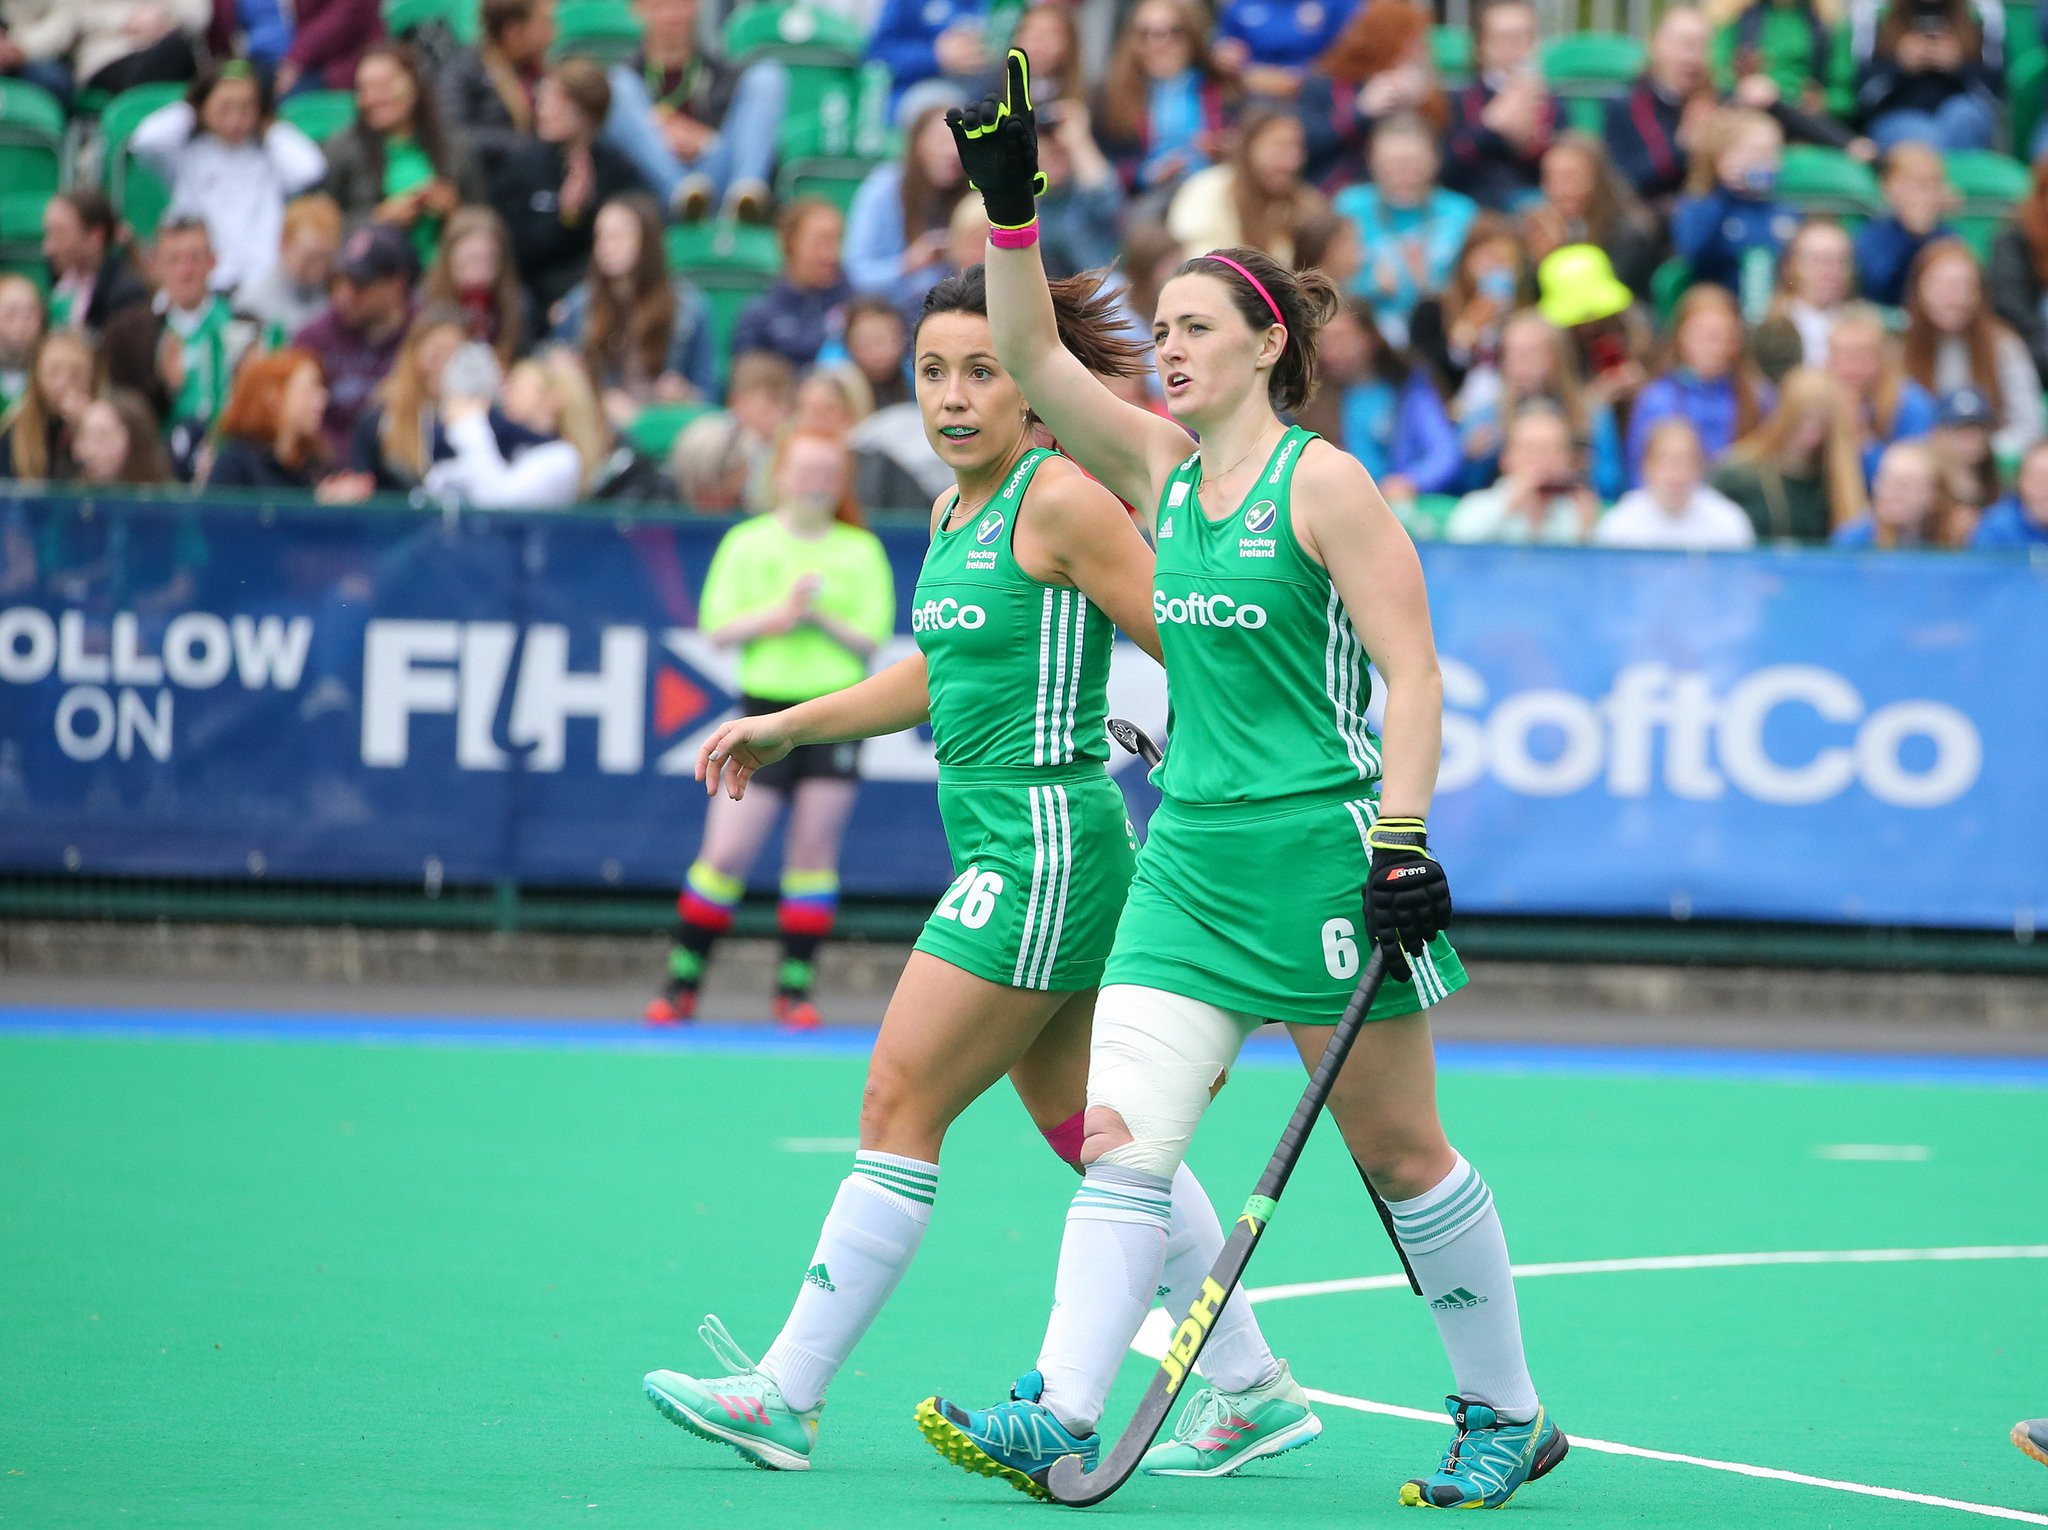 Ireland's women's hockey team is to benefit greatly from Paris 2024 funding ©Getty Images